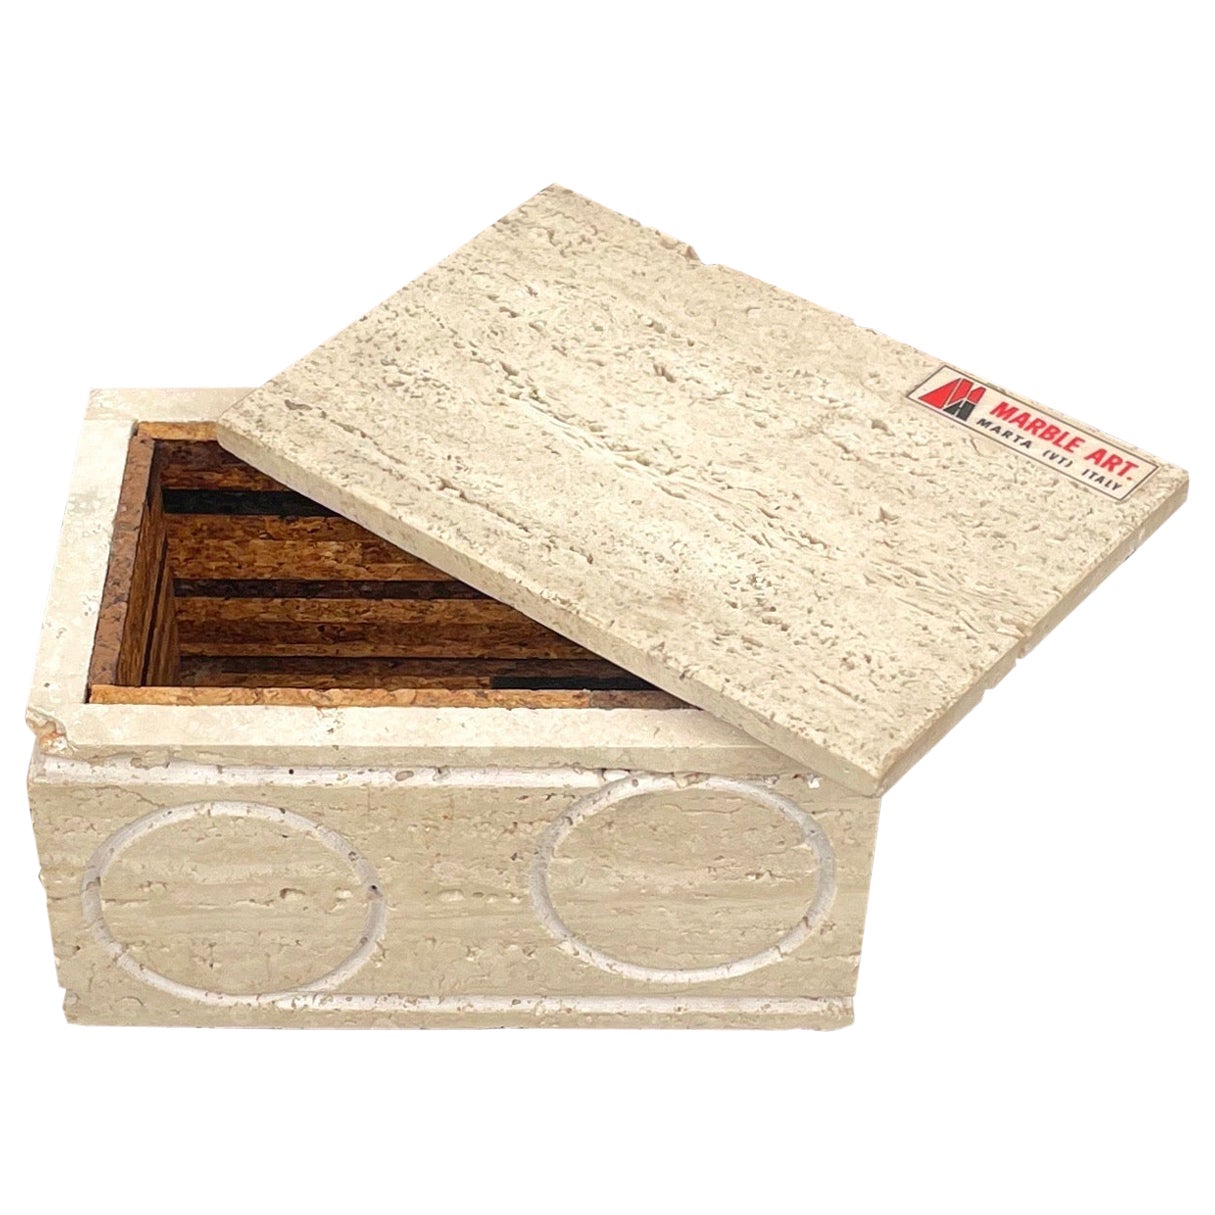 Rectangular Decorative Box in Travertine and Cork by Marble Art, Italy, 1970s